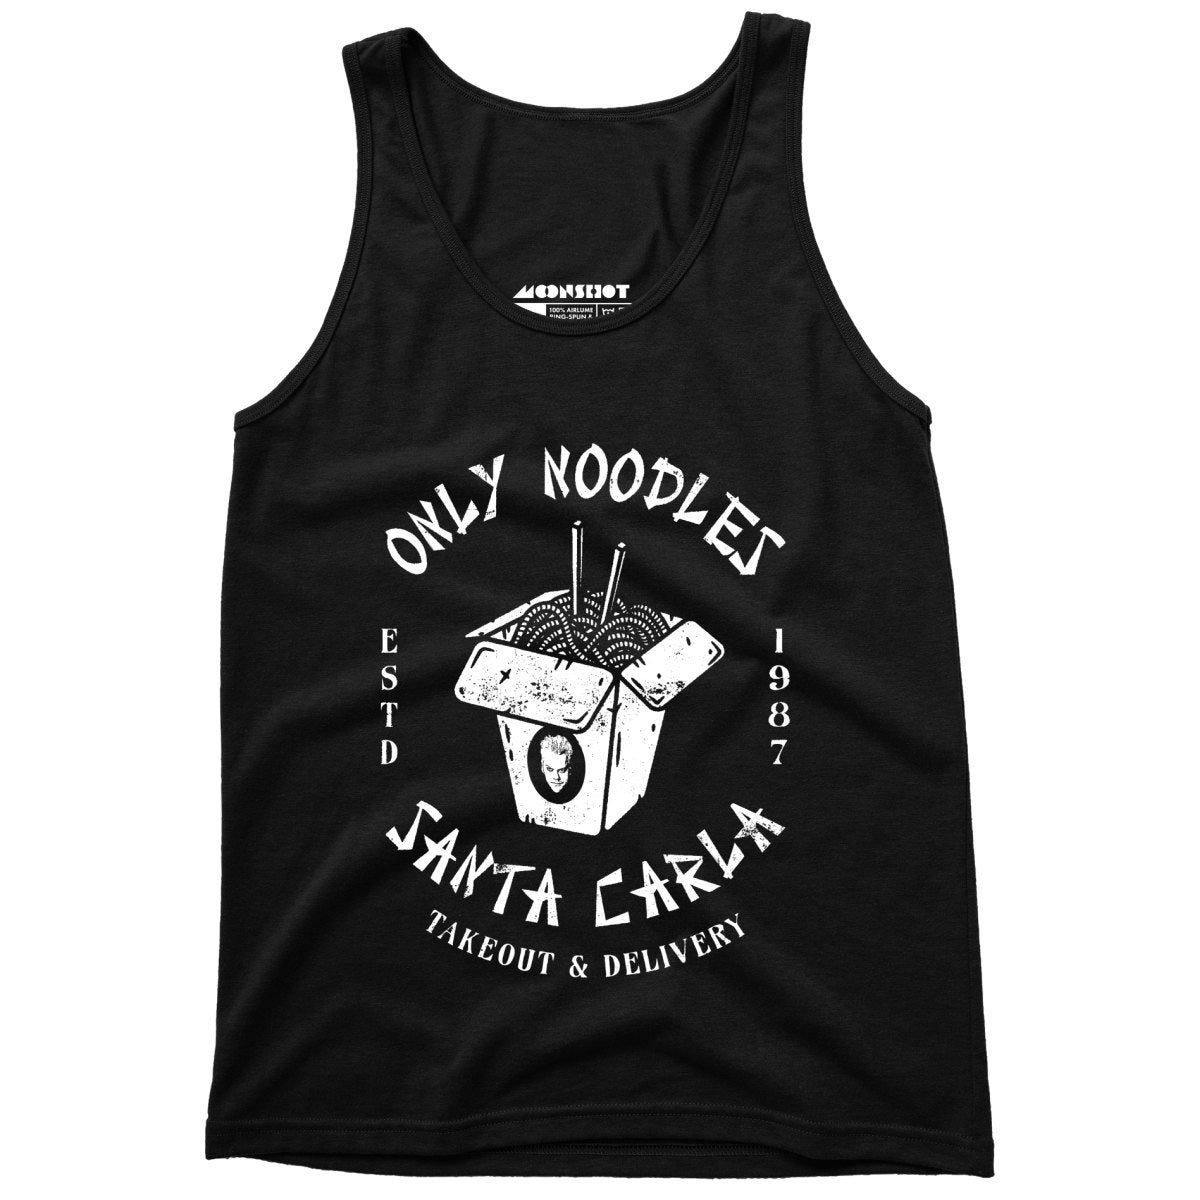 Only Noodles Takeout & Delivery - Santa Carla - Unisex Tank Top